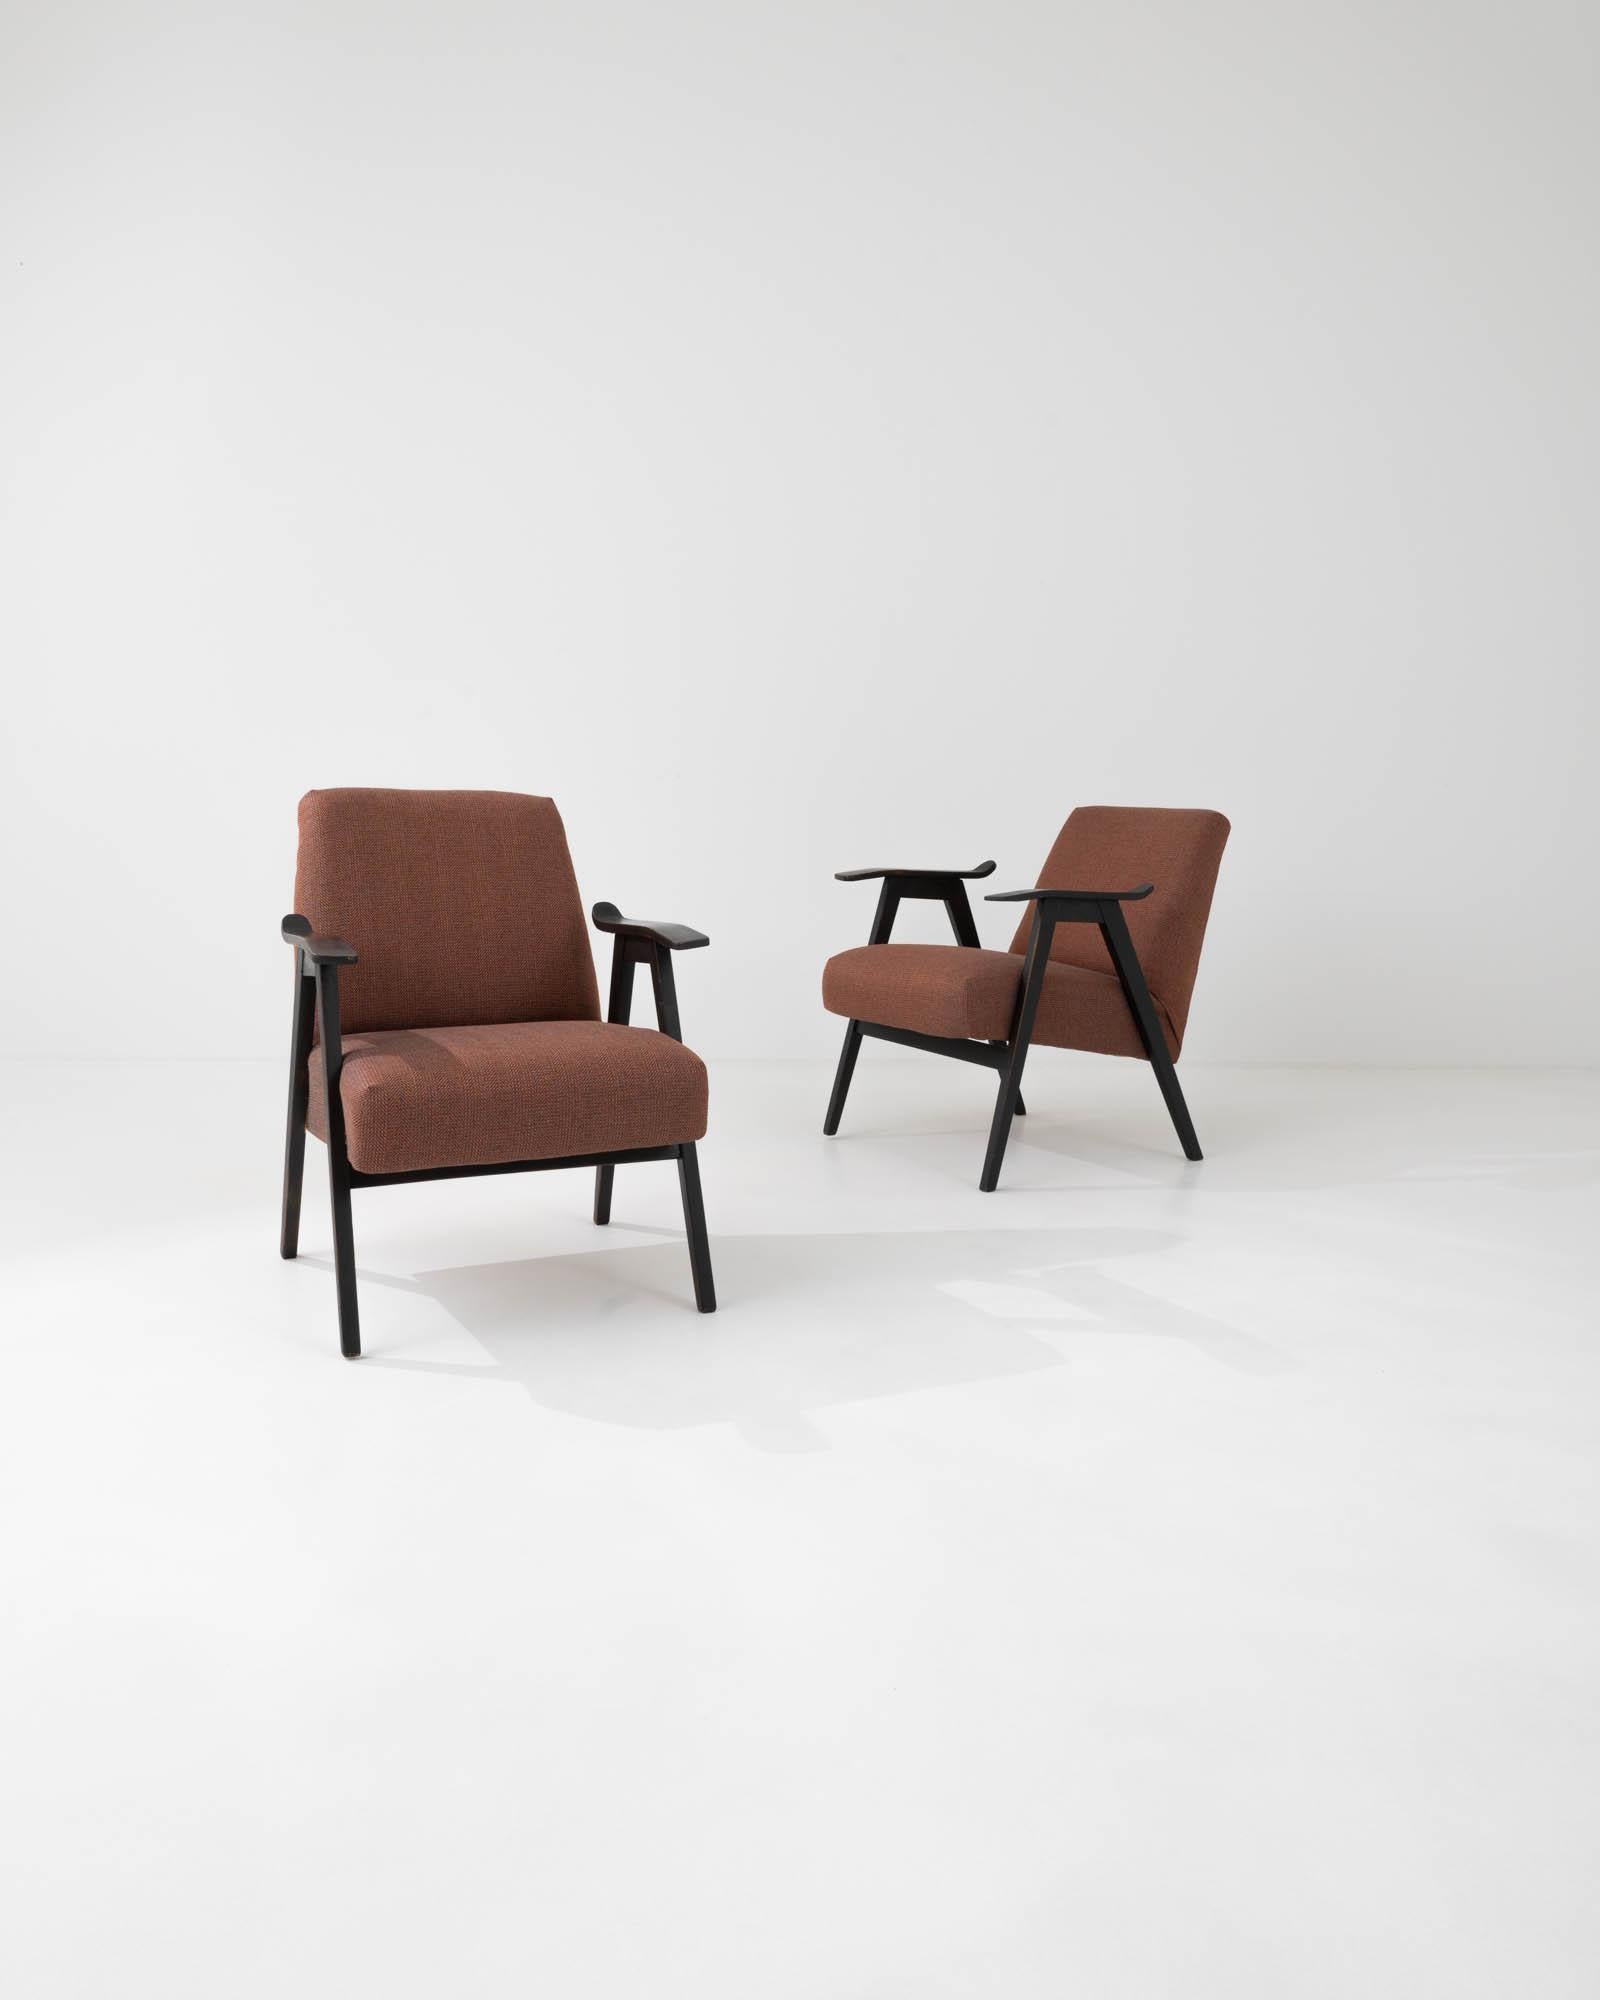 Characterized by the clean lines that define their minimalist silhouette, these armchairs were crafted by the iconic Czech furniture company in the 1960s. The subtle curve and gentle incline of the bentwood arms engage in a captivating dialogue with